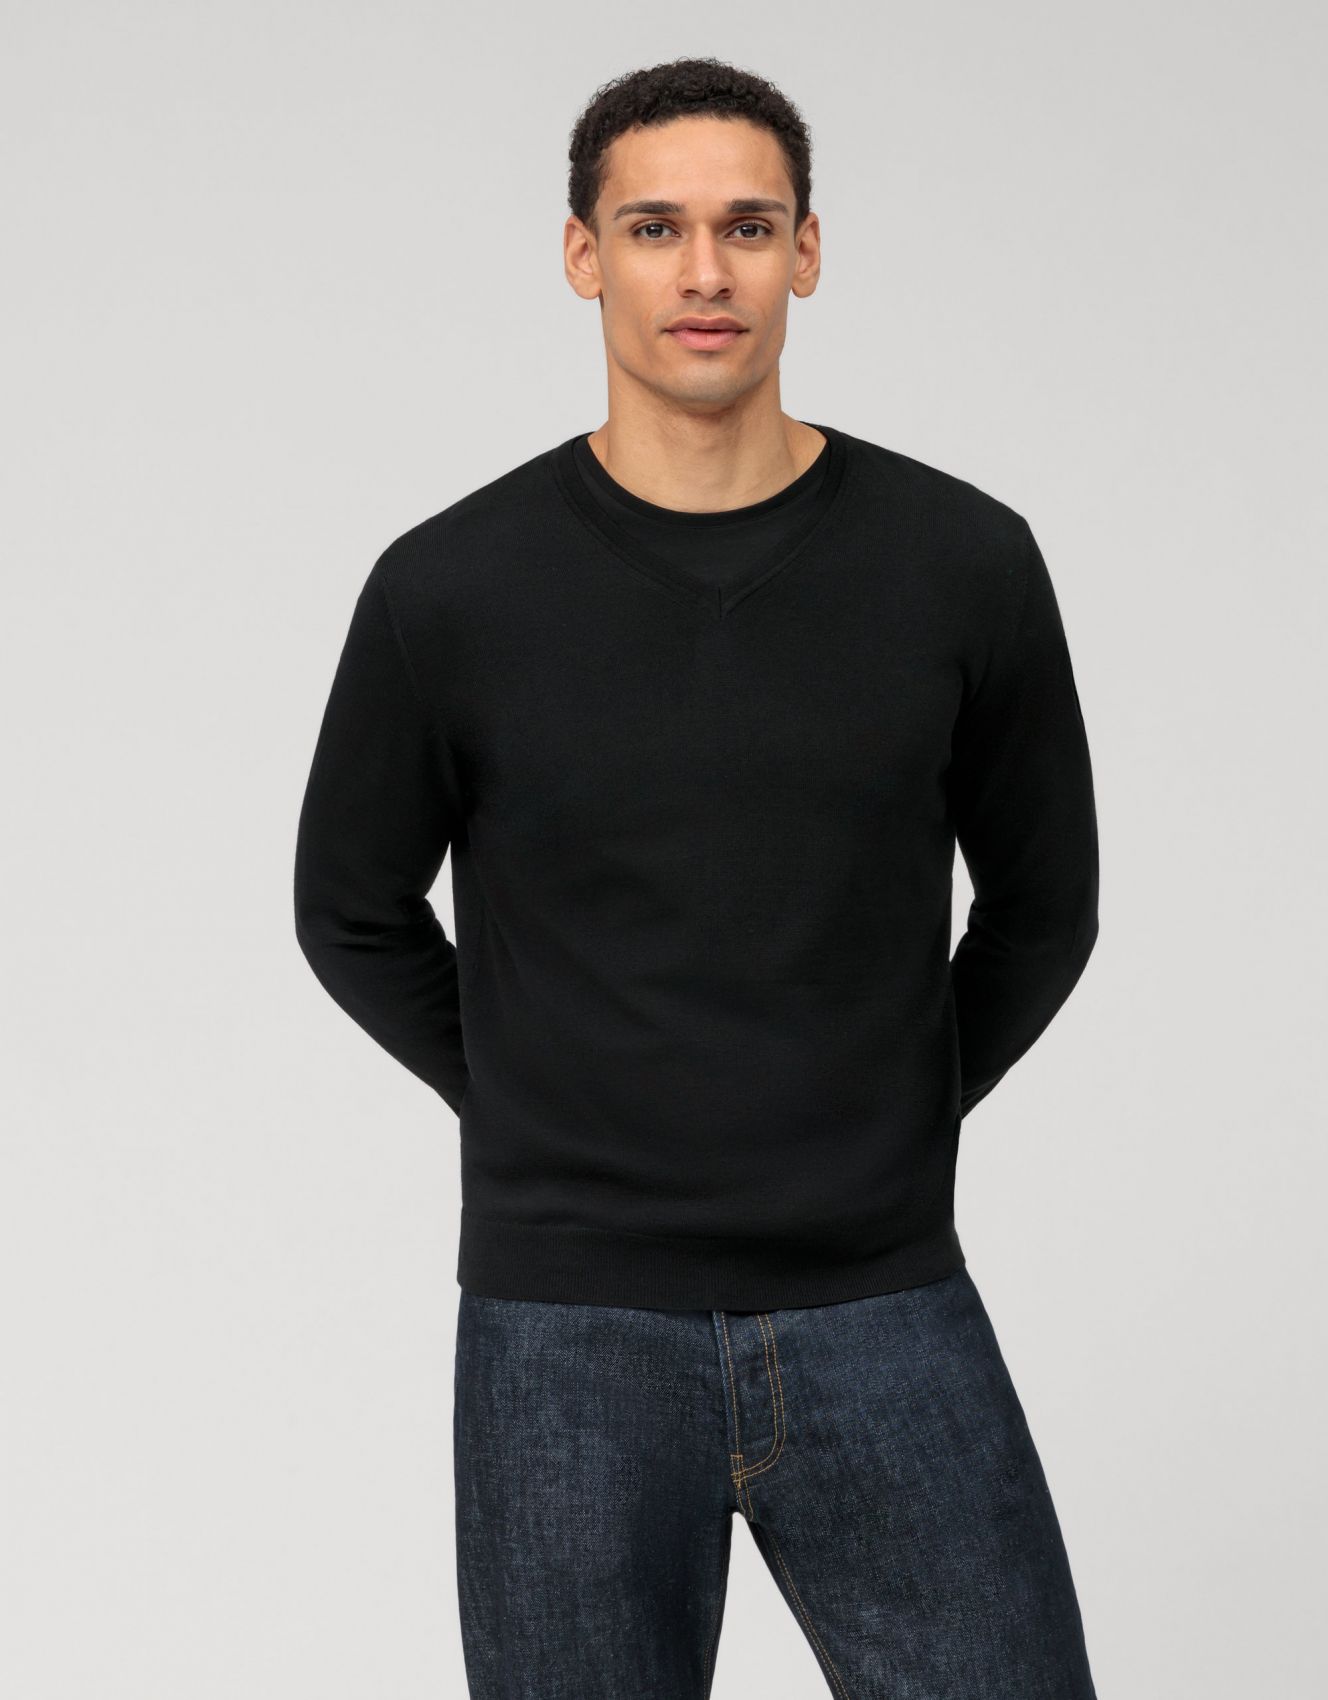 CLASSIC PANTS IN LIGHTWEIGHT WOOL - ANTHRACITE